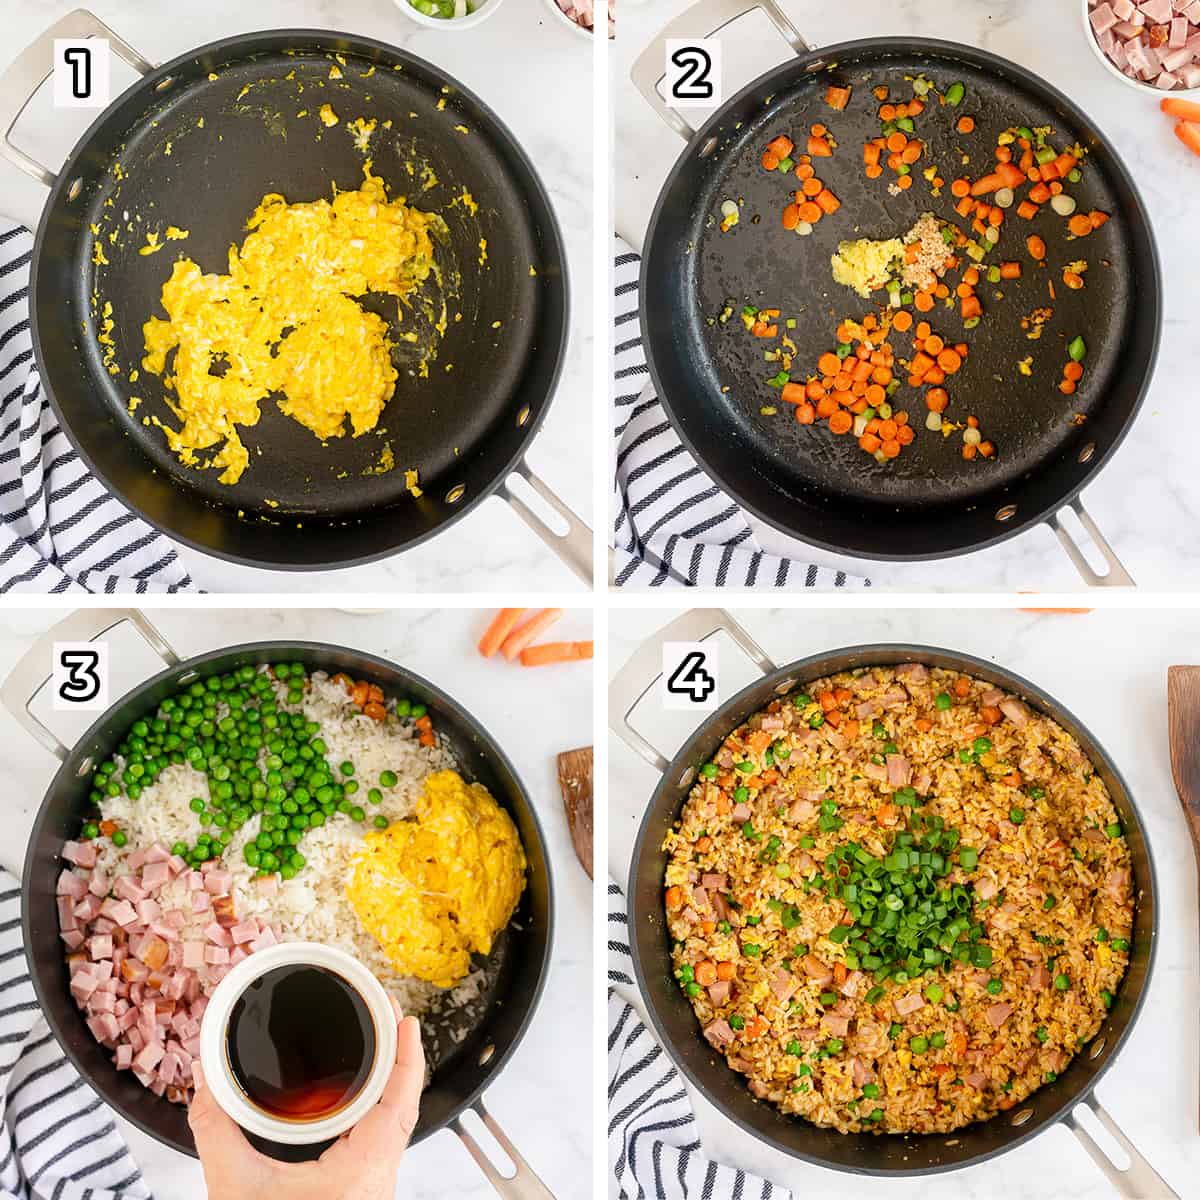 Eggs, vegetables, and rice cook with sauce in a skillet.